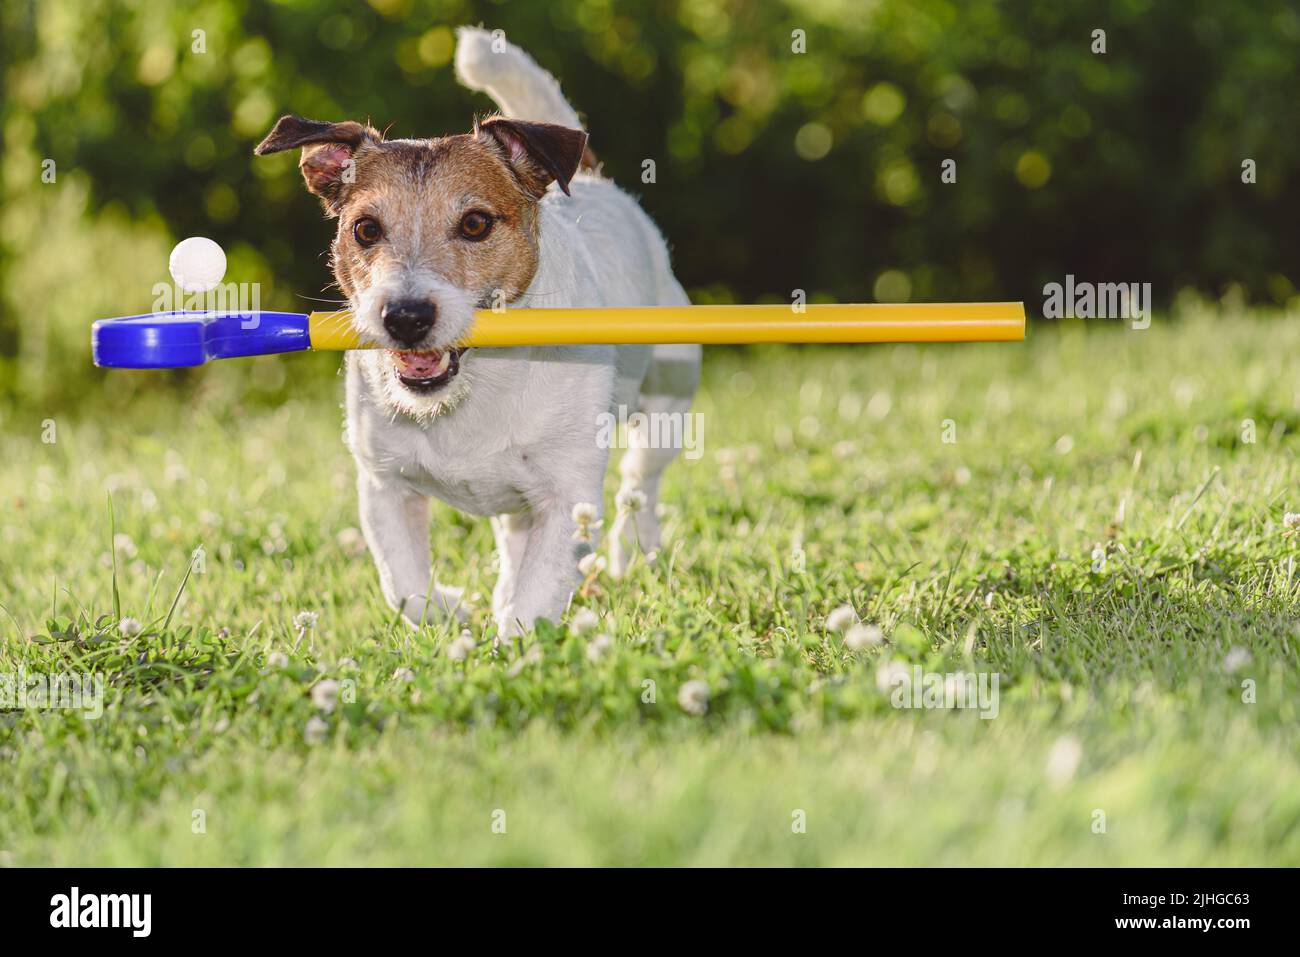 Dog playing with golf club and ball on green grass course Stock Photo